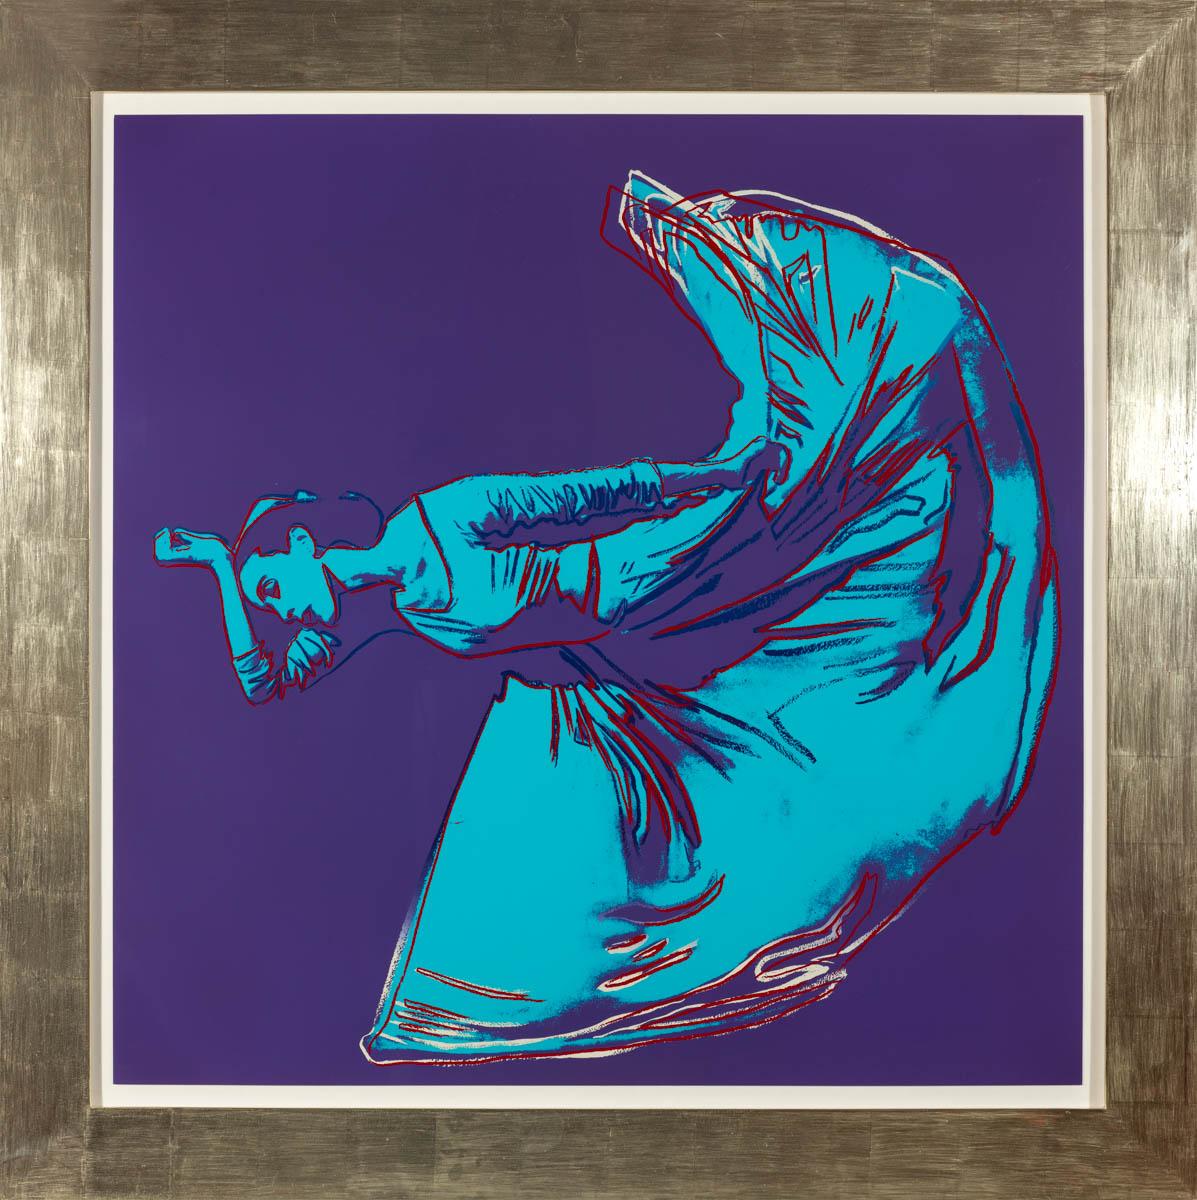 Letter to the World, 1986 (#389, Martha Graham) - Print by Andy Warhol